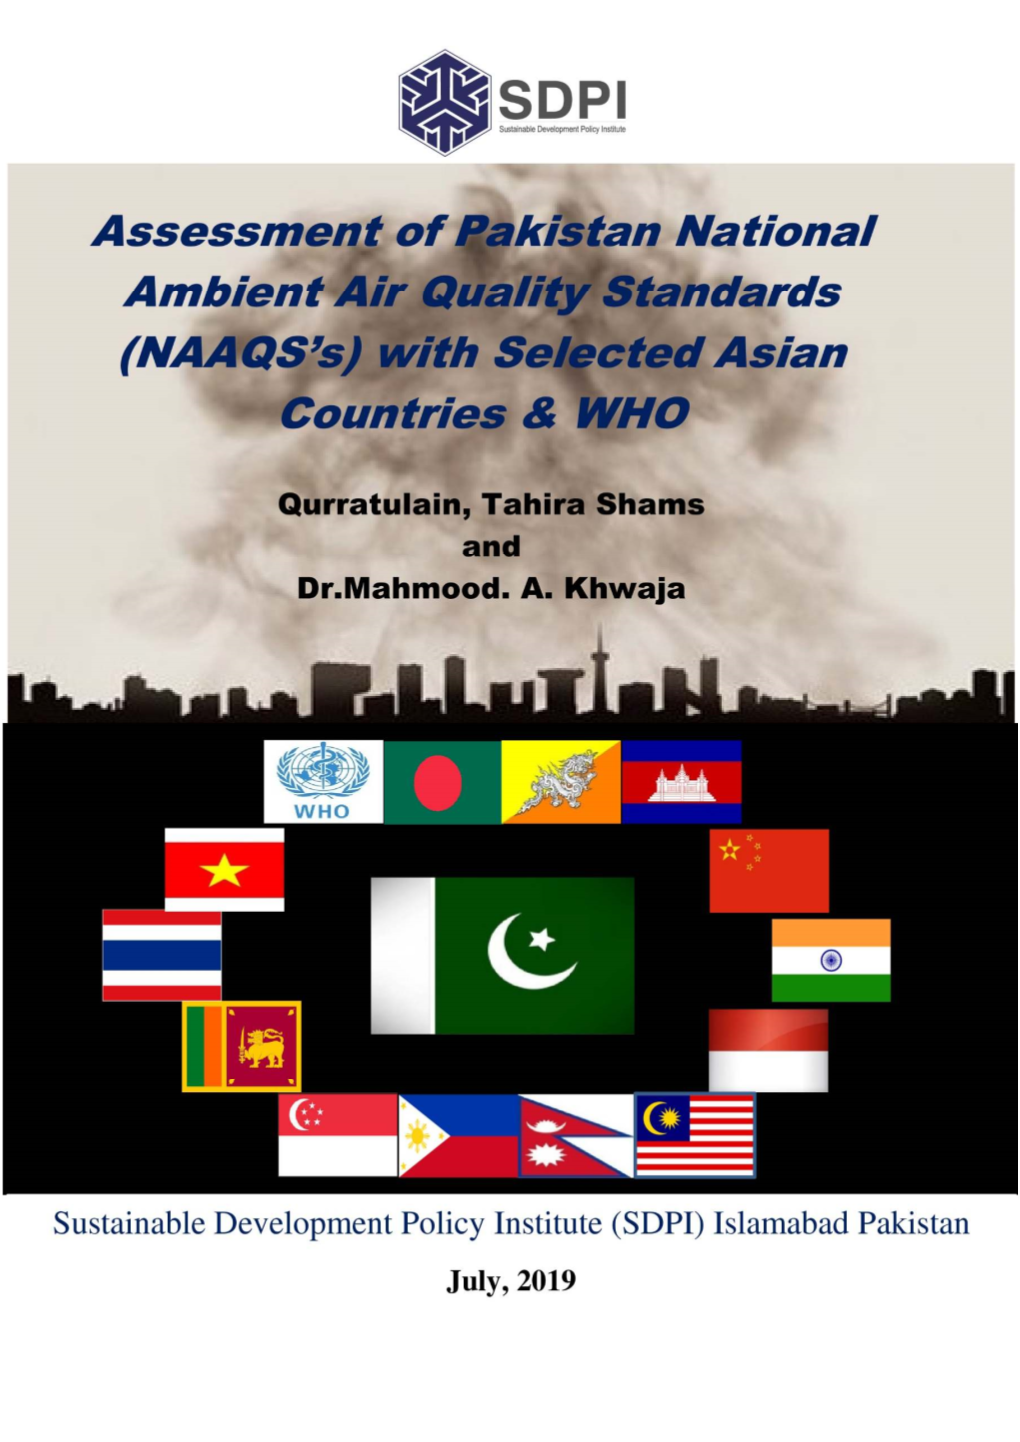 4. Comparative Assessment of Pakistan Ambient Air Quality Standards (Aaqss) with South Asian (SA) and South East Asian (SEA) Countries